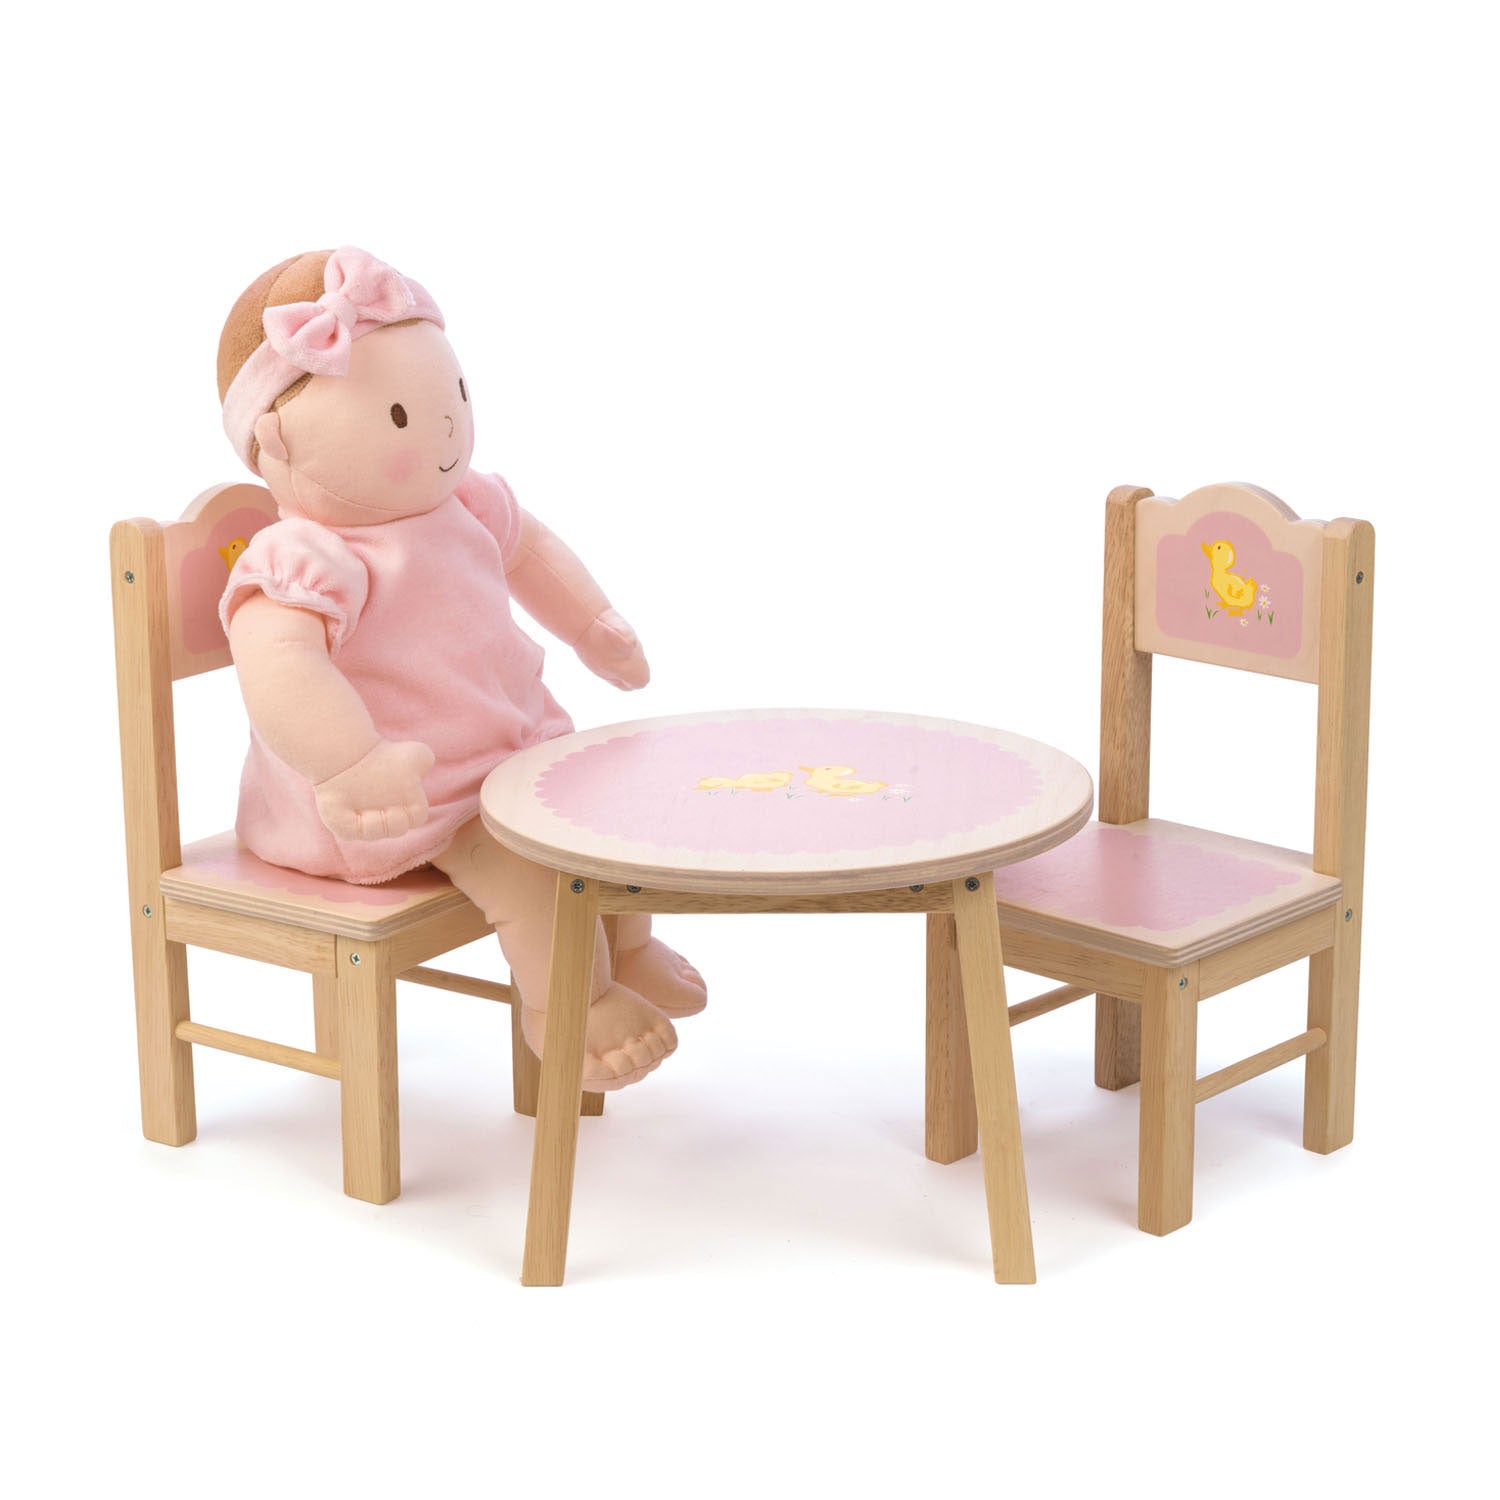 <p>Add this Sweetiepie table and chair set to your dolly furniture collection! Encourages creative role play and helps to develop trust and friendship. </p>
<p><strong>Self</strong> <strong>Assembly is required. Dolly not included</strong></p>
<p>Age range: 3 Years And Older  </p>
<p>Table: 9.25&quot; x 9.25&quot; x 6.5&quot; / Chair&quot; 5.12&quot; x 5.31&quot; x 10.43&quot;  </p>
<p>Weight: 1.10 lbs</p>
